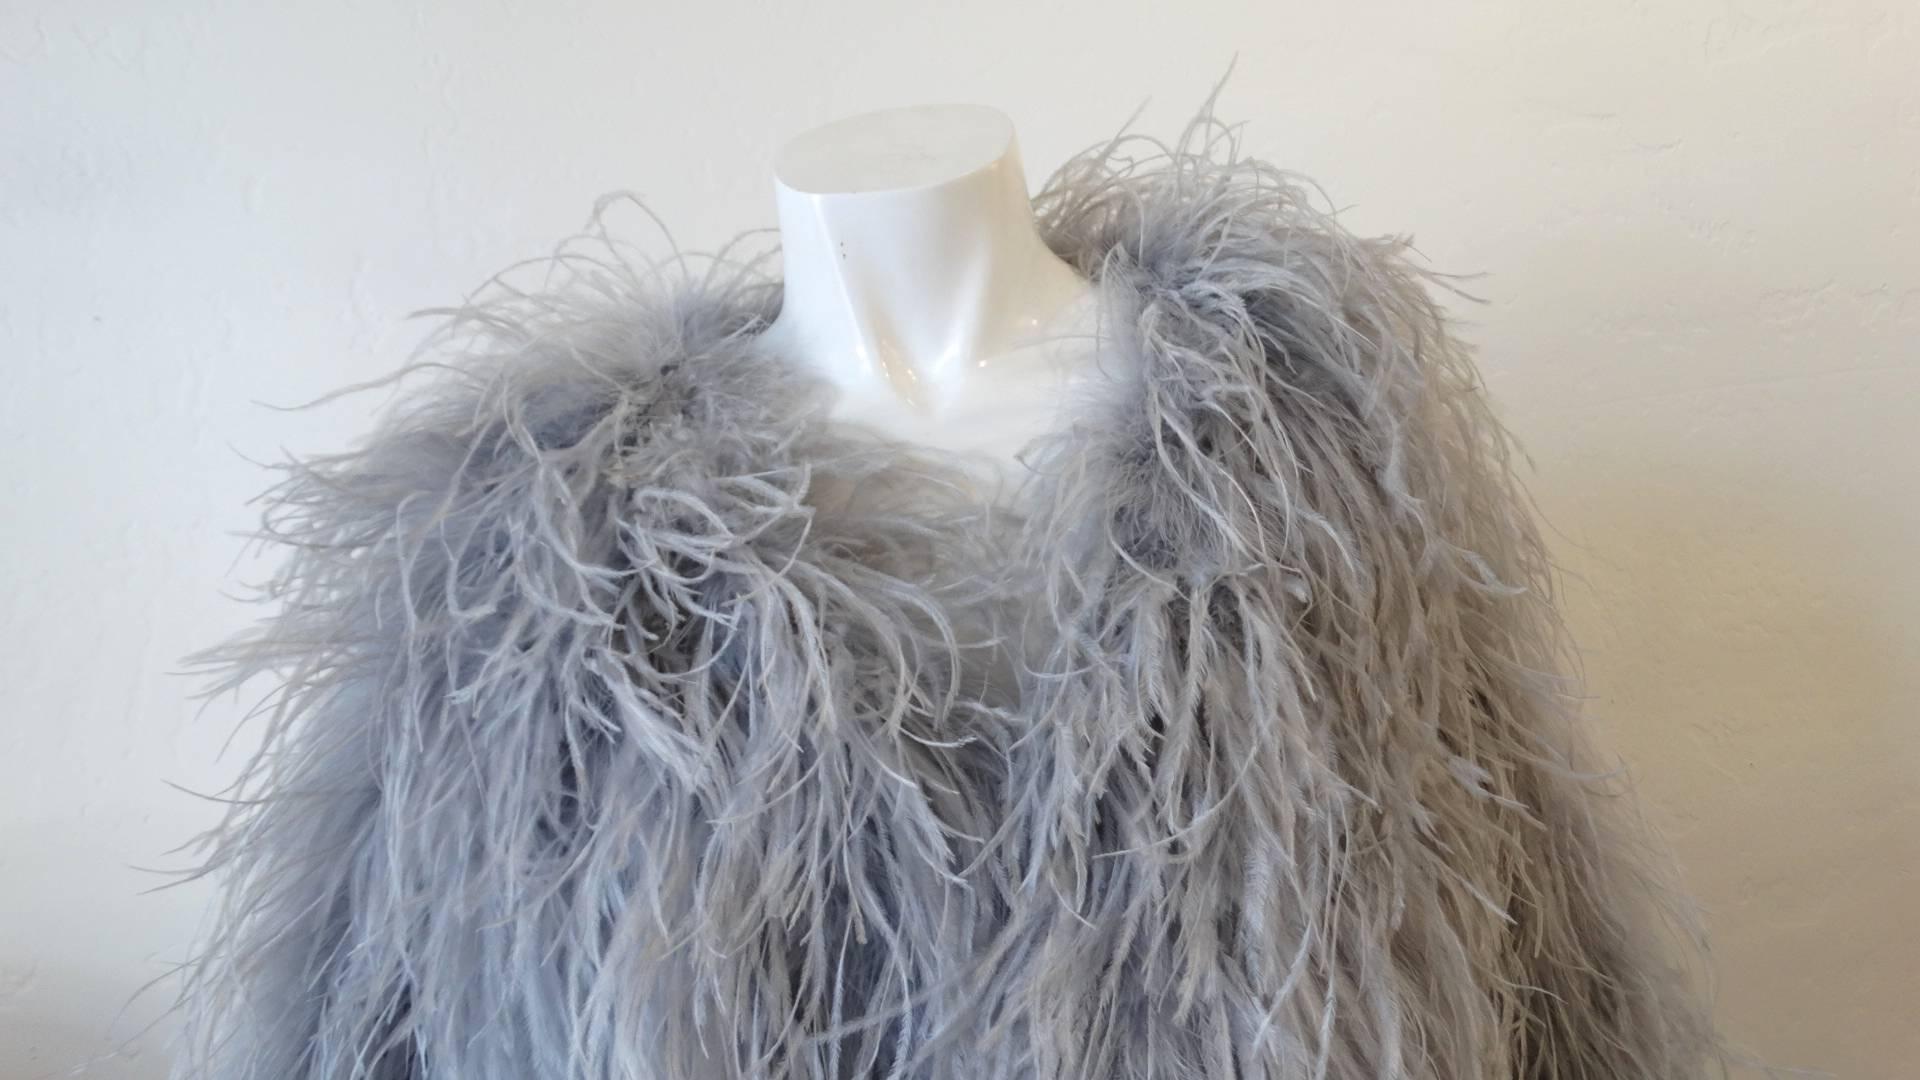 Channel your inner rockstar with our amazing grey feathered jacket from 1970s clothing label Biba! Made of a grey satin shell and completely covered with long, wispy feathers. Long sleeved fit with cropped length. Hook and eye closures up the front.